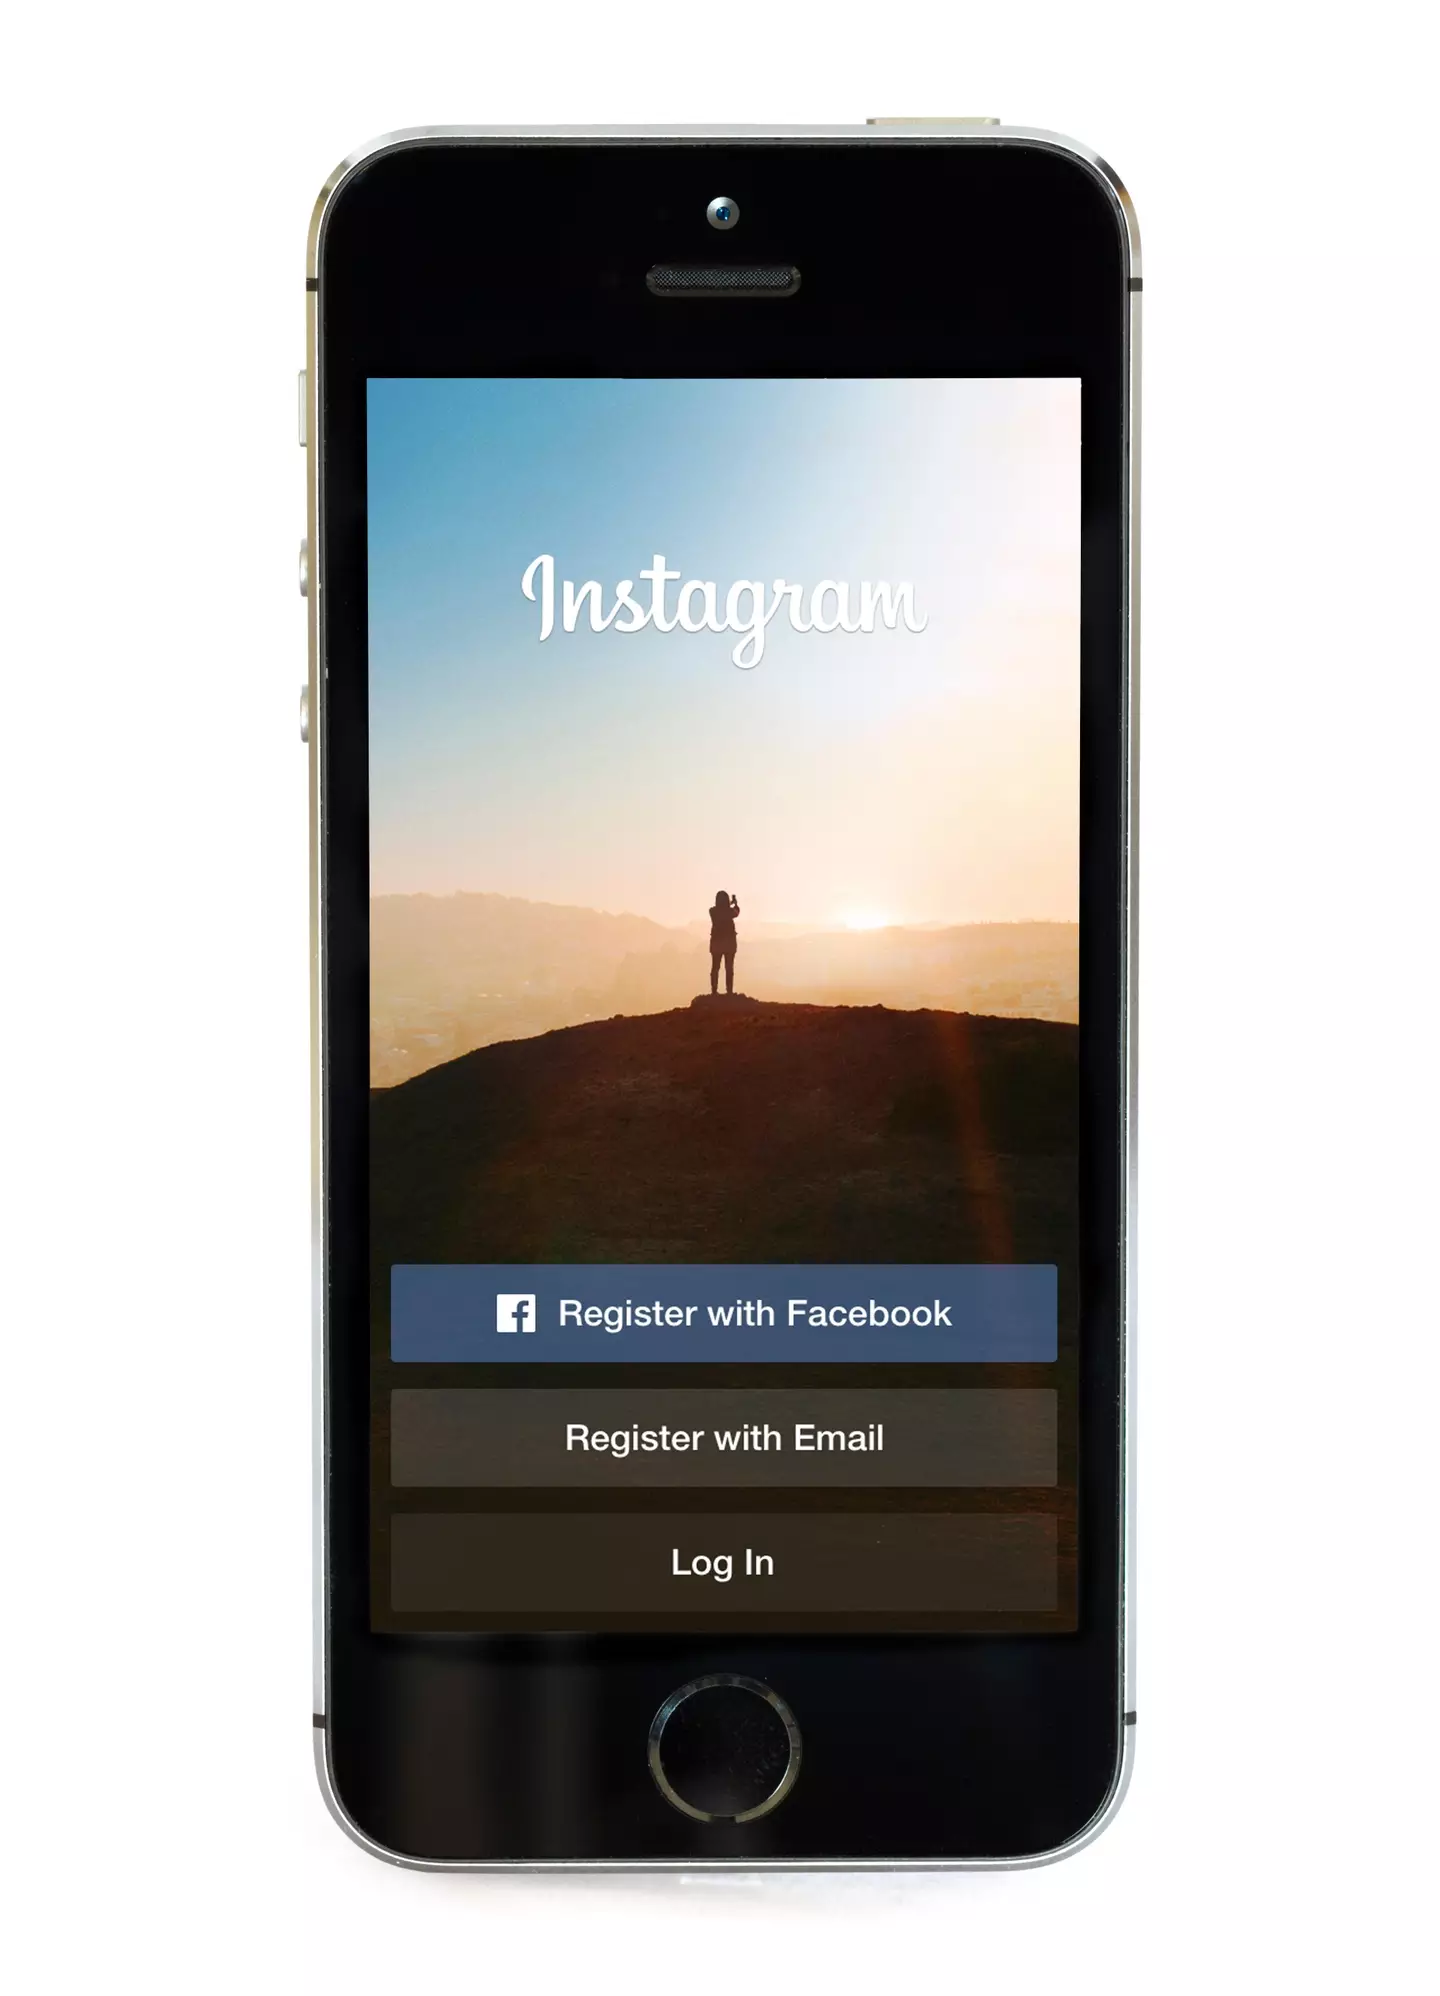 The move is the latest example of Instagram’s efforts to prioritise video.